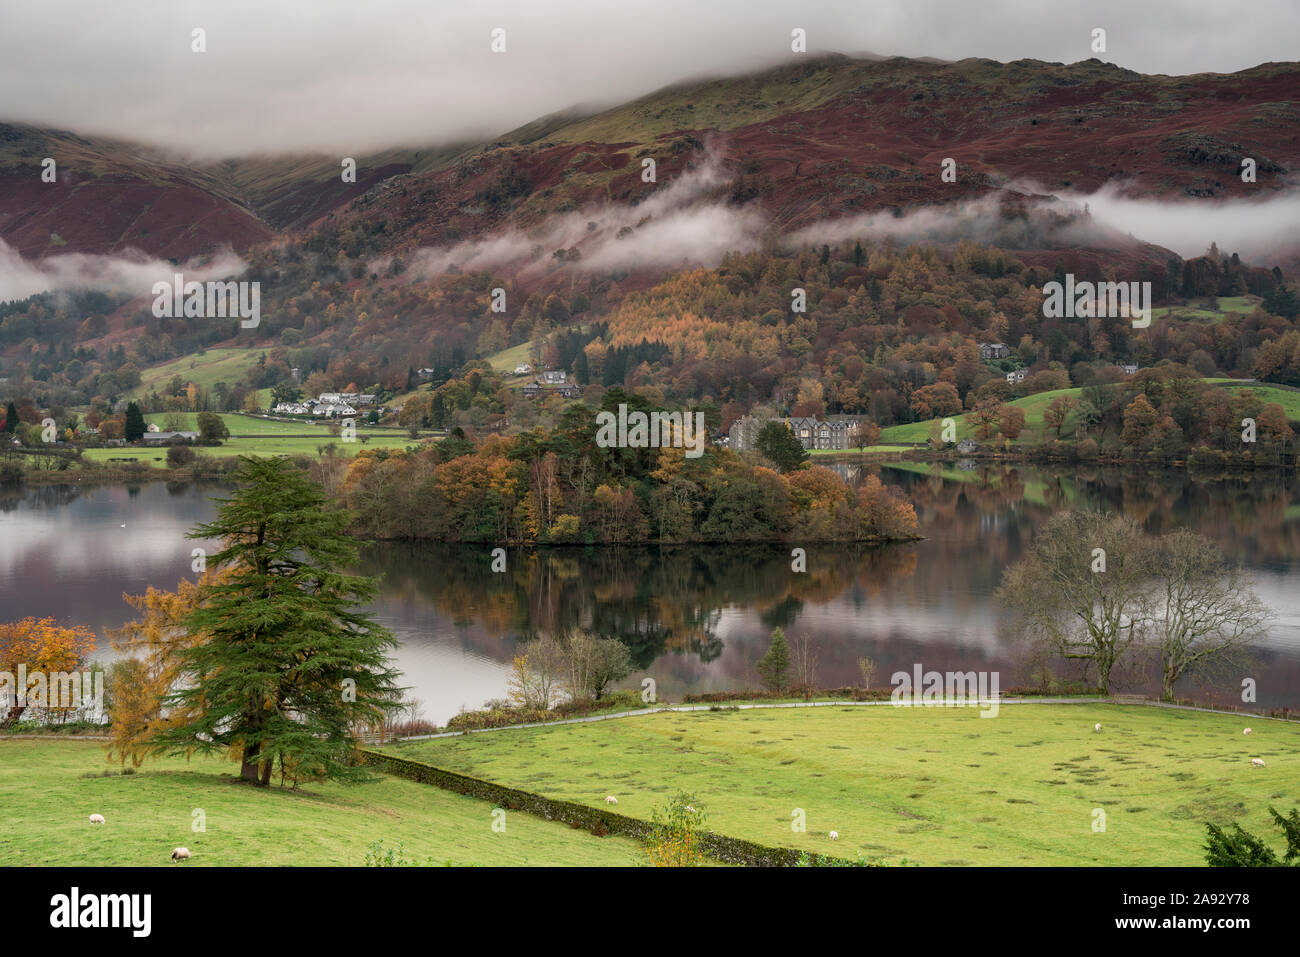 Mist and low cloud hanging over Grasmere island in the middle of Grasmere lake on a rainy autumnal day Stock Photo